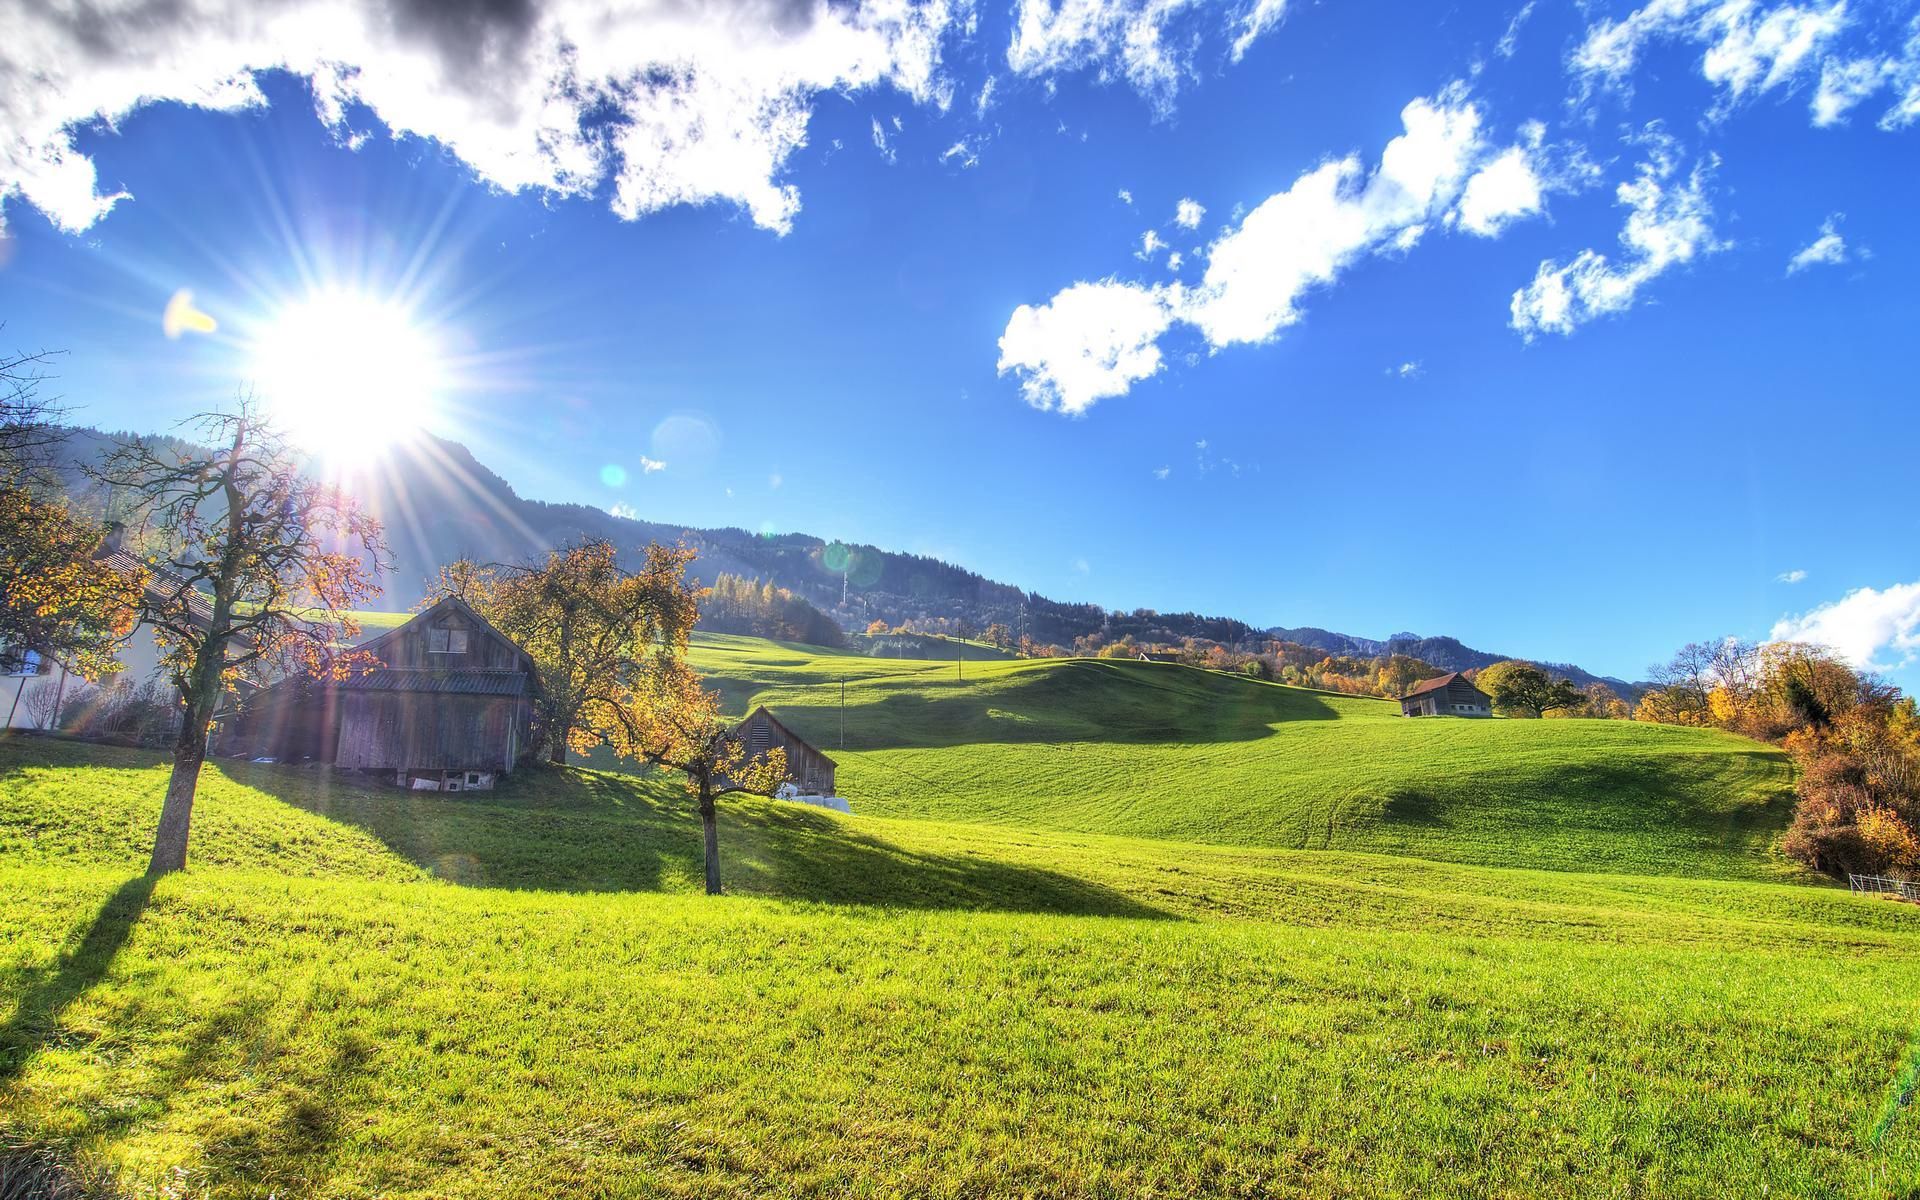 beams, fields, sun, warmth home screen for smartphone